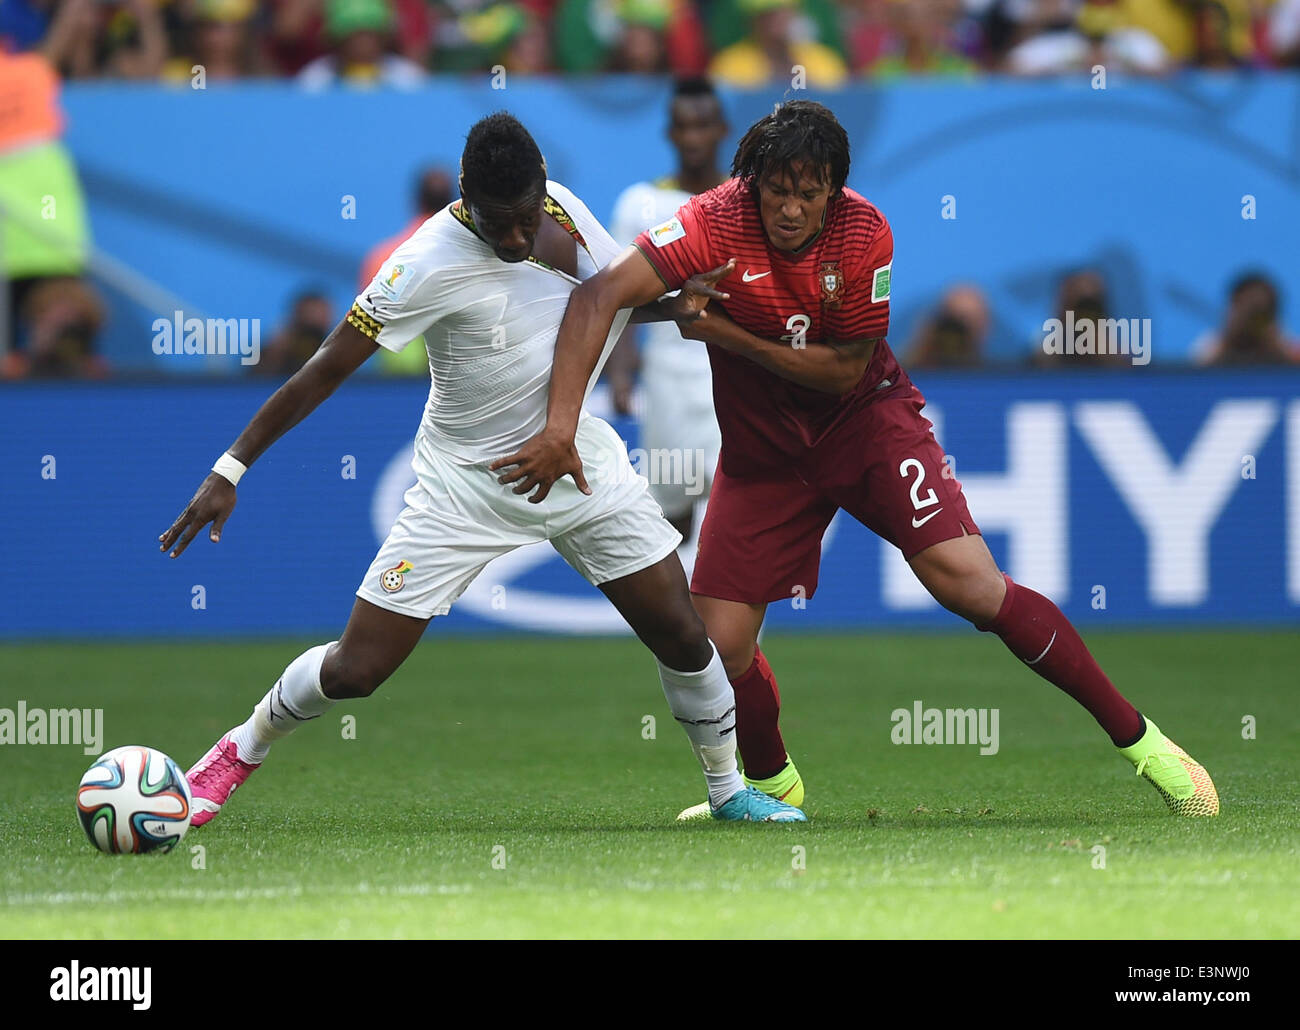 Brasilia, Brazil. 26th June, 2014. Asamoah Gyan (L) of Ghana in action against Bruno Alves of Portugal during the FIFA World Cup 2014 group G preliminary round match between Portugal and Ghana at the Estadio National Stadium in Brasilia, Brazil, on 26 June 2014 Credit: © dpa picture alliance/Alamy Live News  Stock Photo